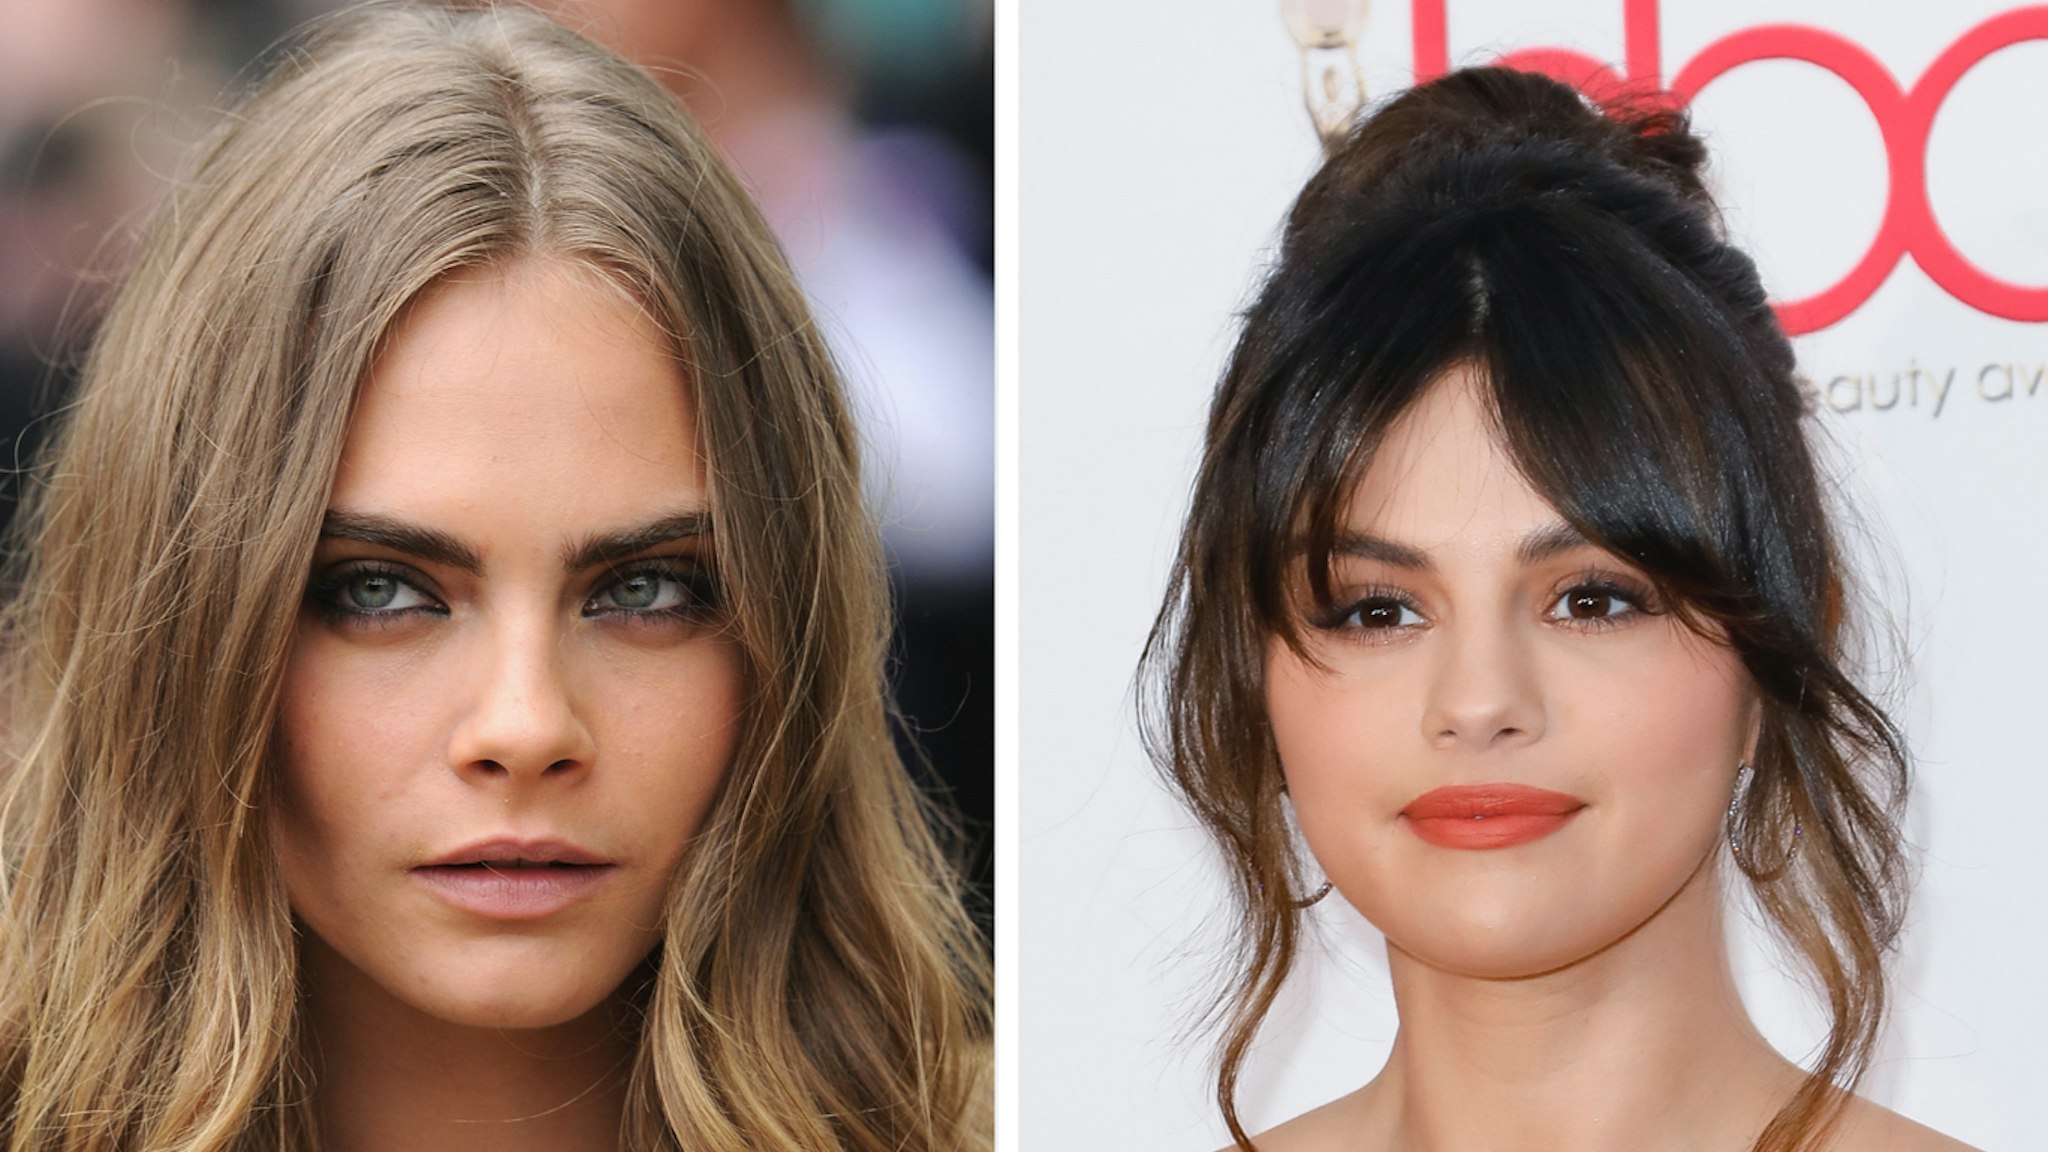 Cara Delevingne attends the Burberry Womenswear Spring/Summer 2016 show during London Fashion Week at Kensington Gardens on September 21, 2015 in London, England. Selena Gomez attends the 2020 Hollywood Beauty Awards at The Taglyan Complex on February 06, 2020 in Los Angeles, California.